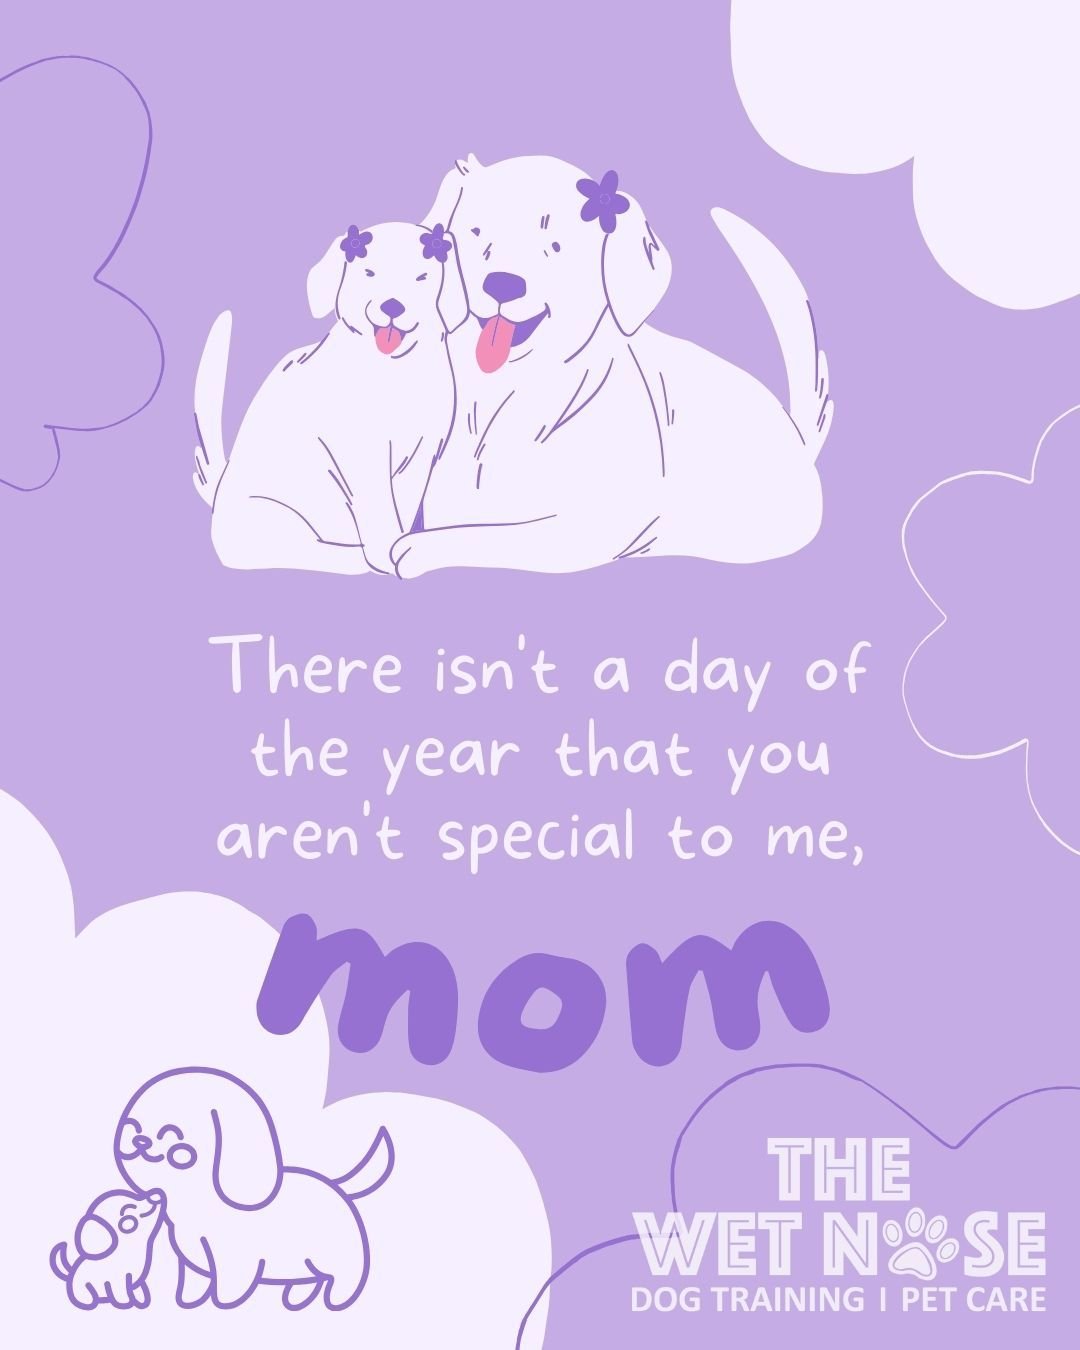 🐾 Wishing all the incredible human and pet moms alike out there a pawsitively wonderful Mother's Day! 🌸 🐶 Show your mom some extra love today! 💕 

#MothersDay #DogMom #CatMom #PetSittingServices #PetSit #DogWalkingServices #DogWalk #AnimalLover #